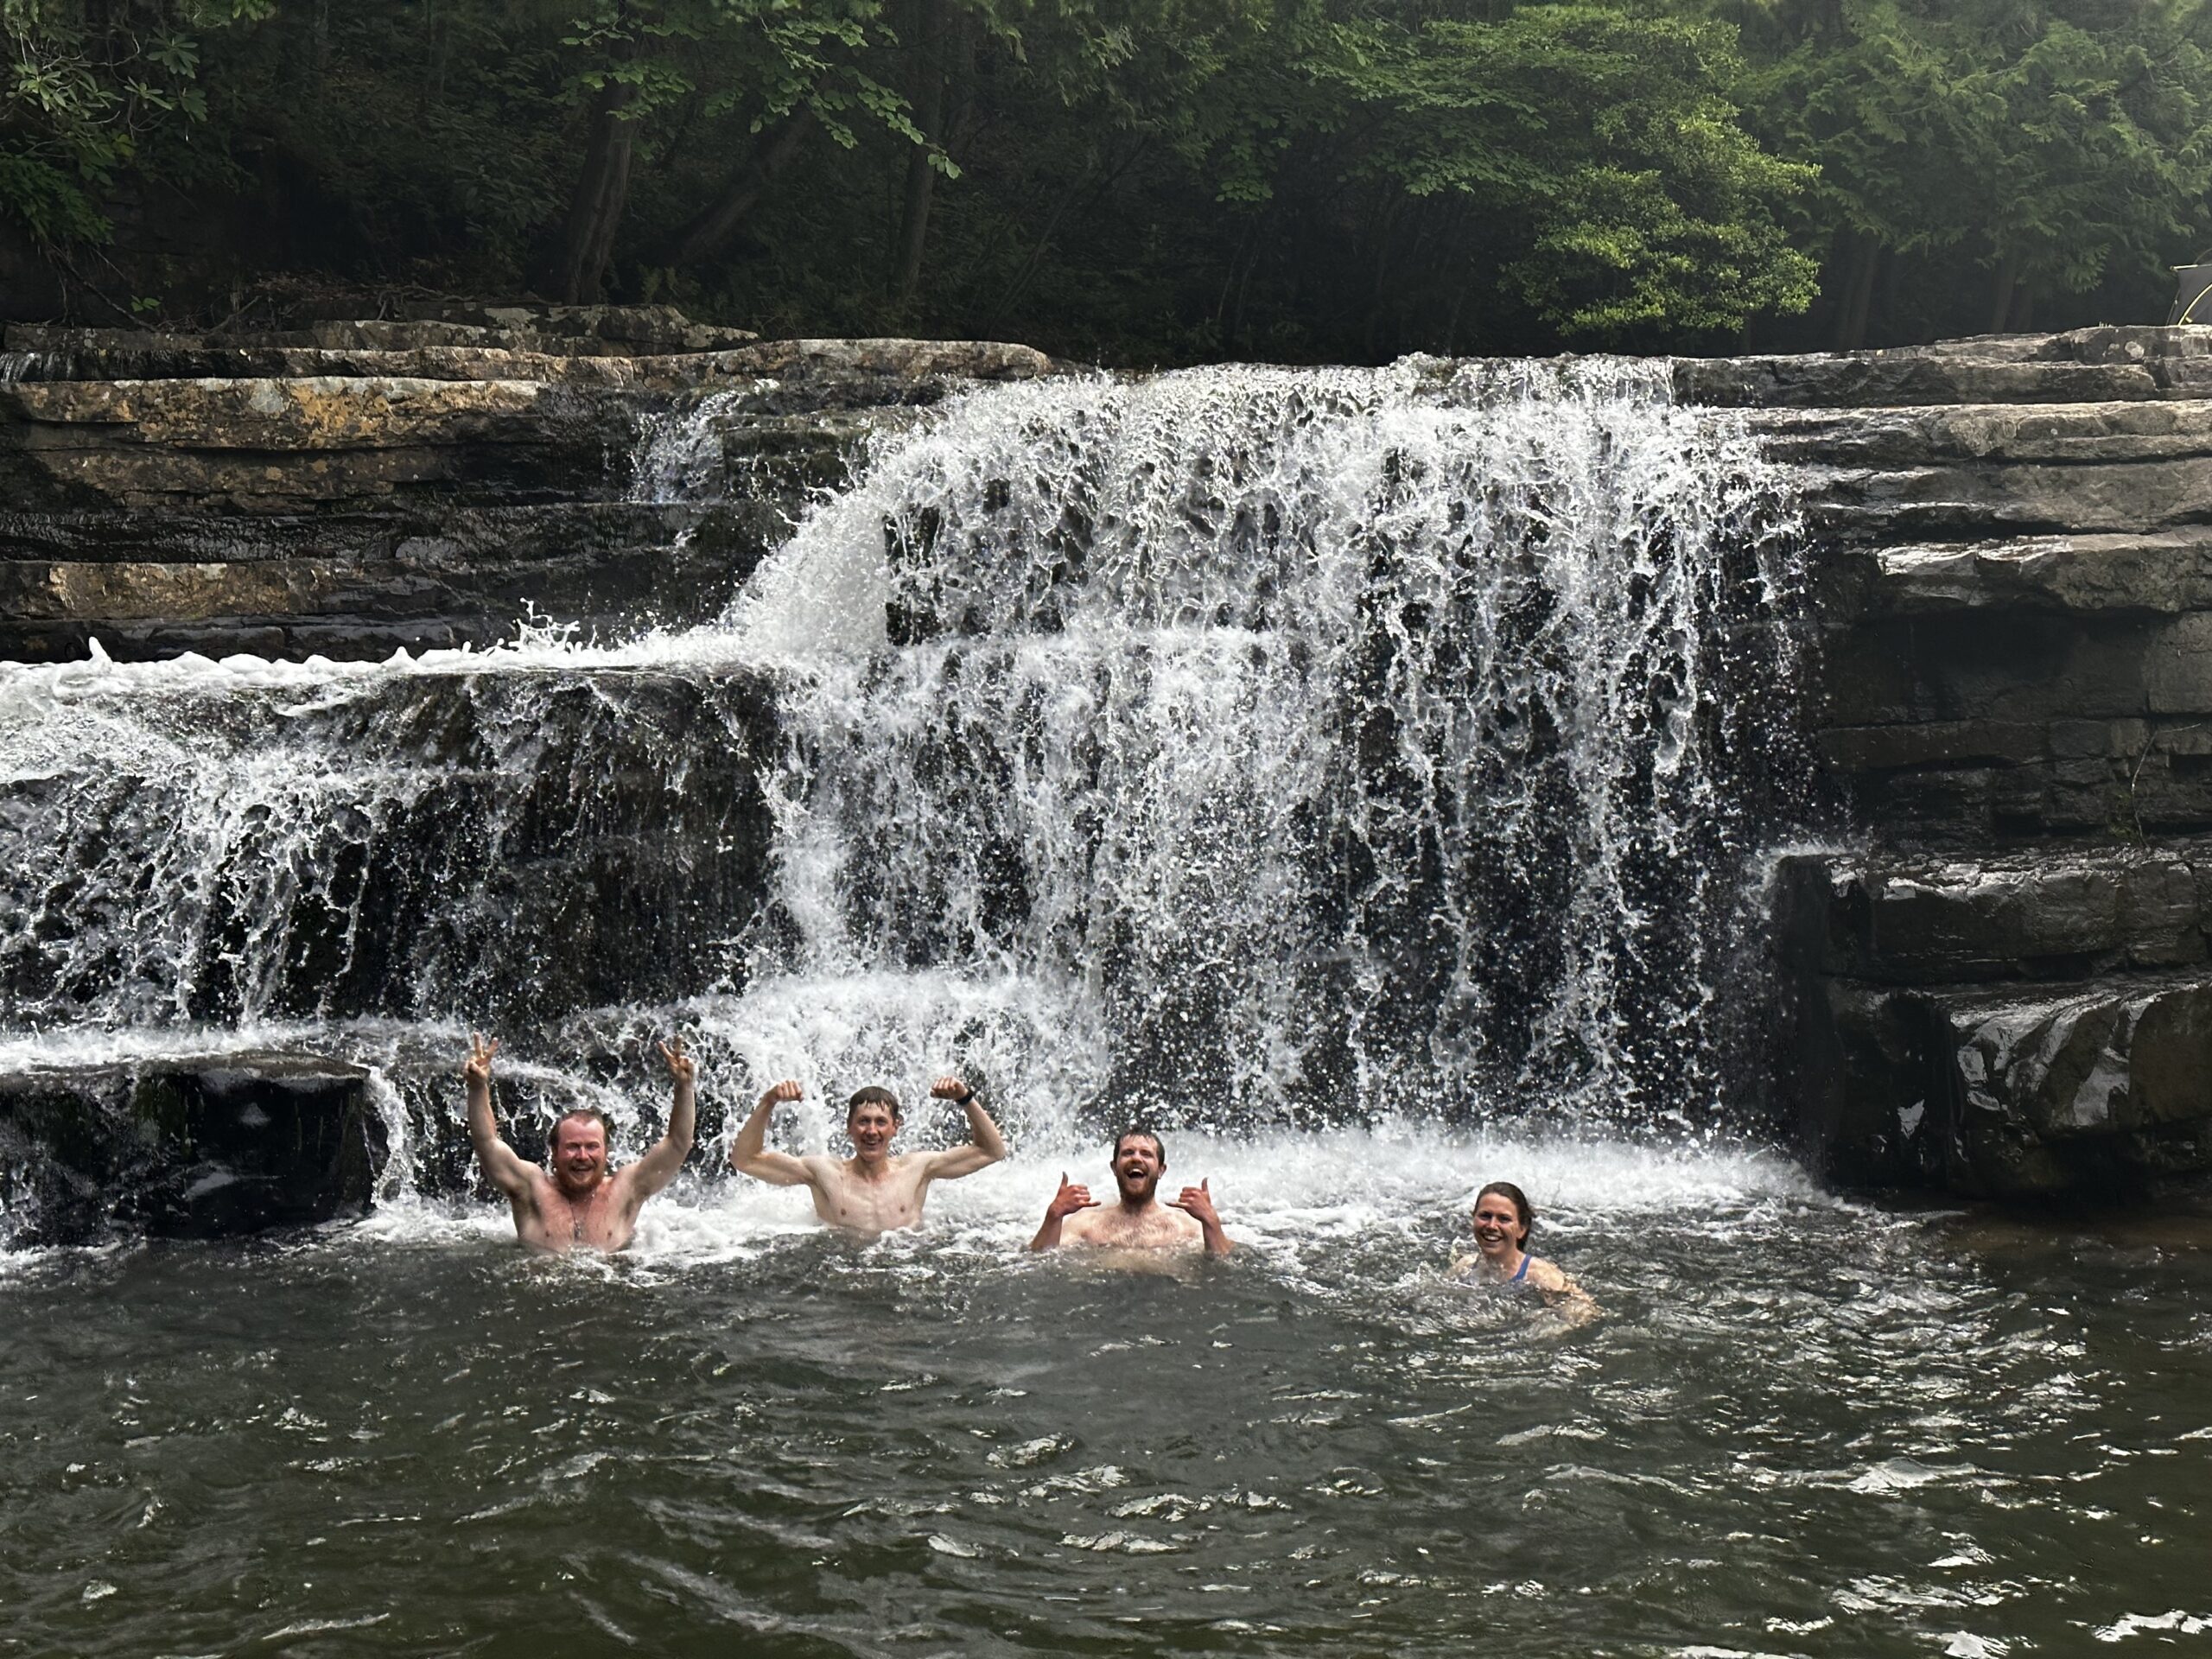 This image shows some of my tramily members and myself swimming in Dismal Falls. 